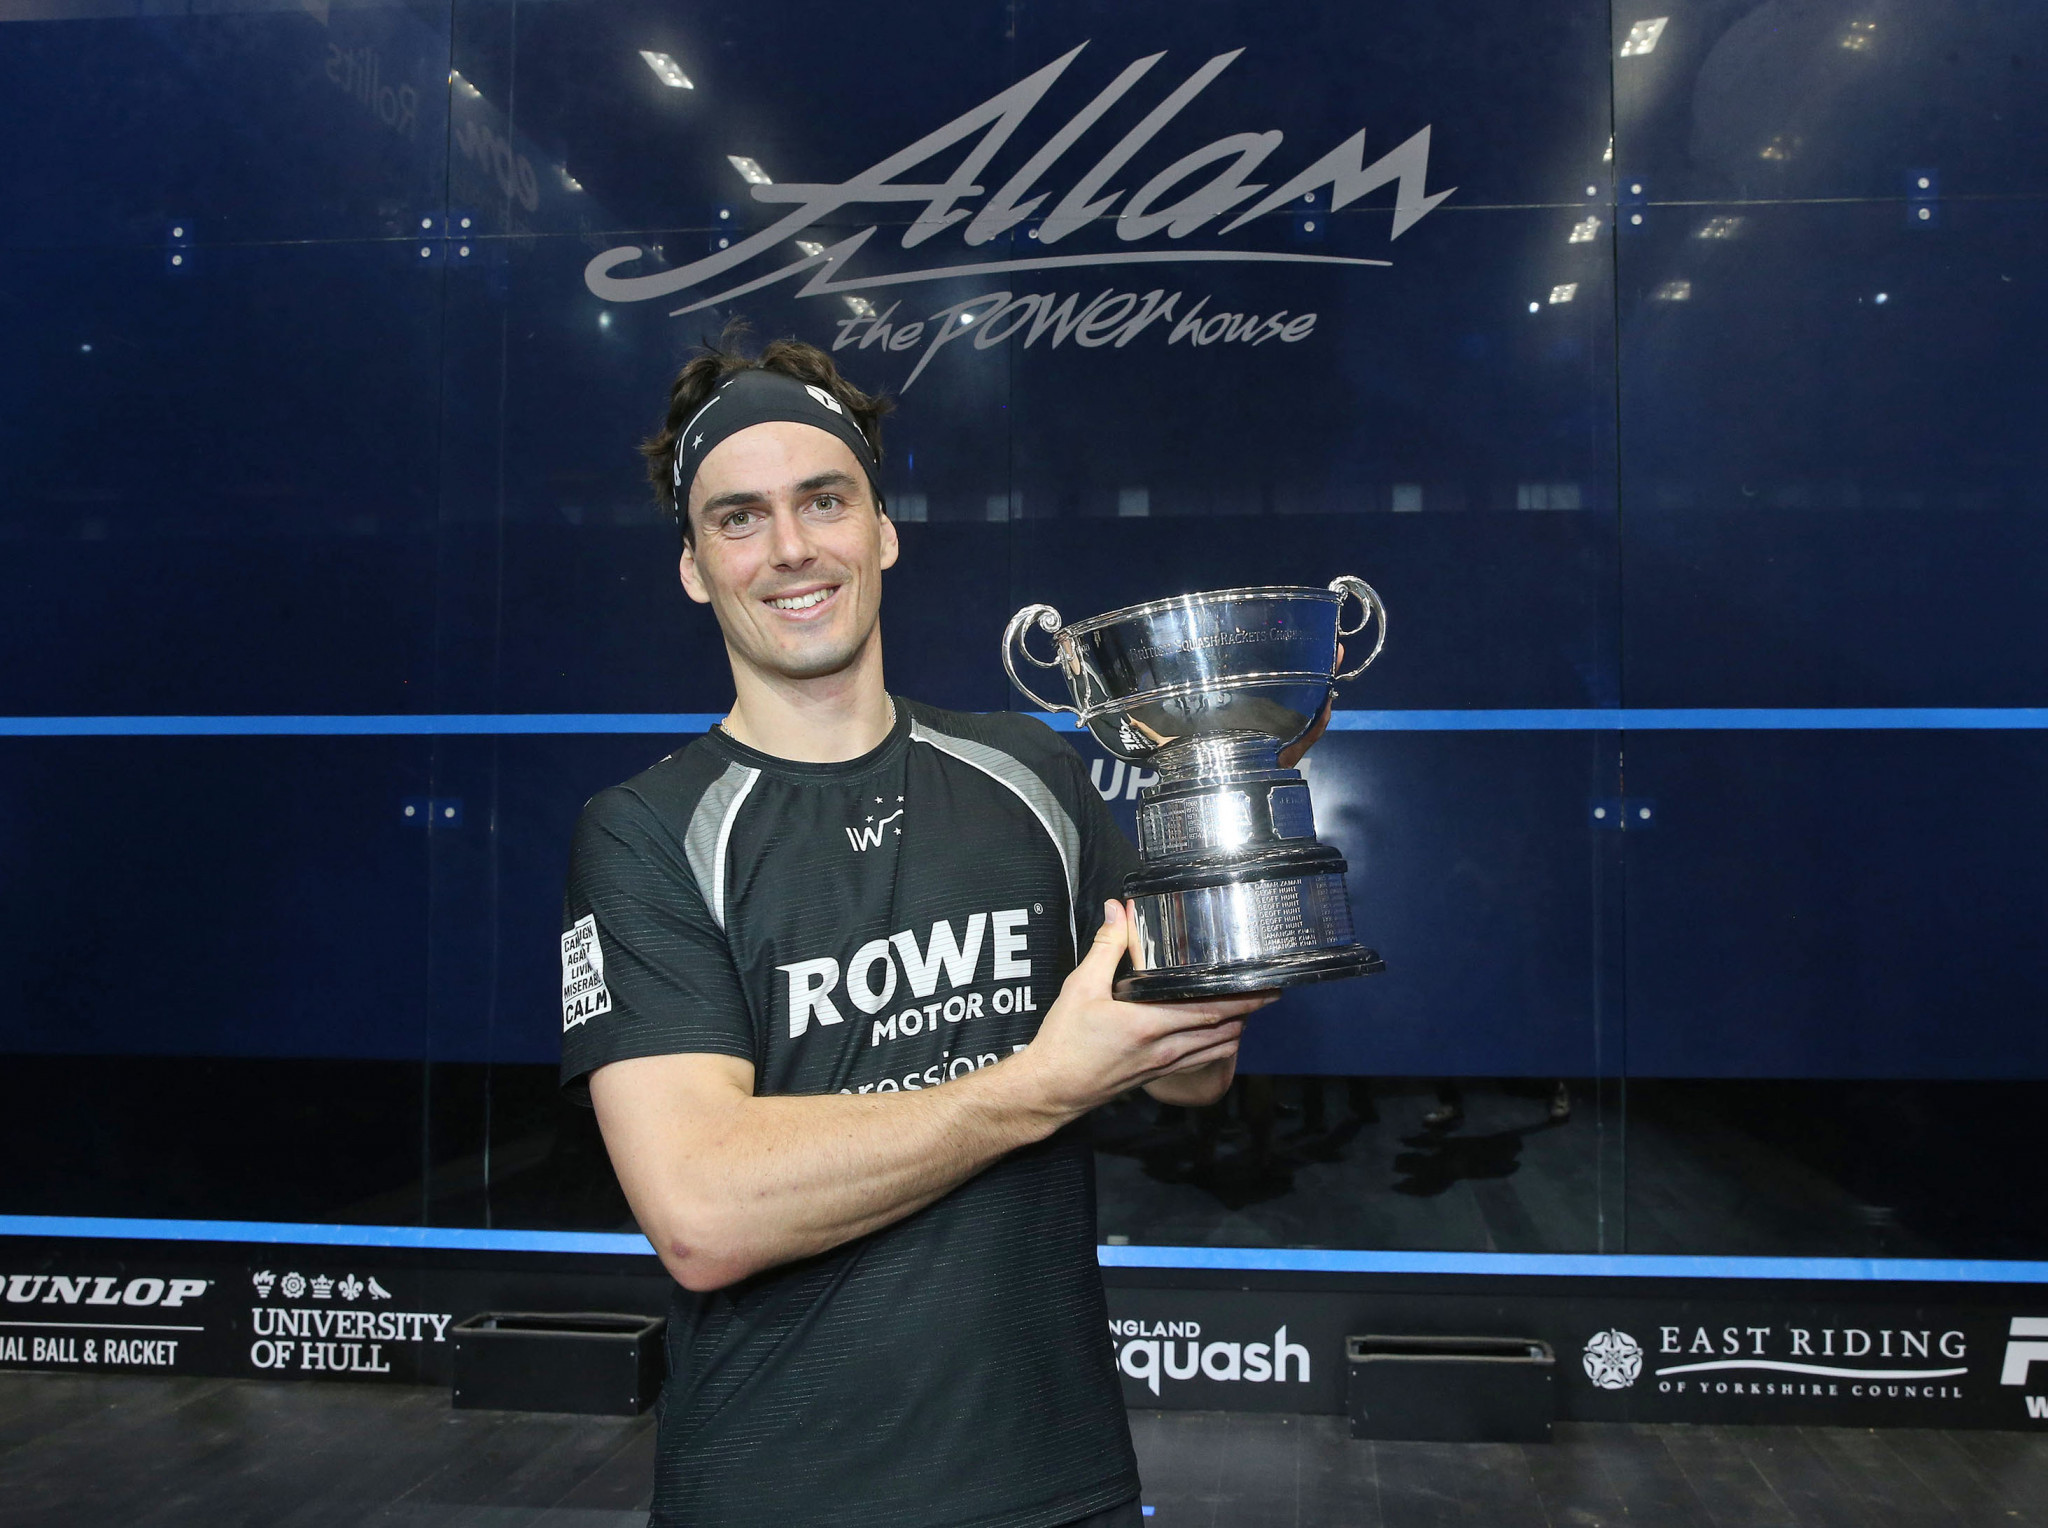 New Zealand's world number one Paul Coll won the last men's platinum event on the PSA World Tour at the British Open in Hull ©PSA World Tour